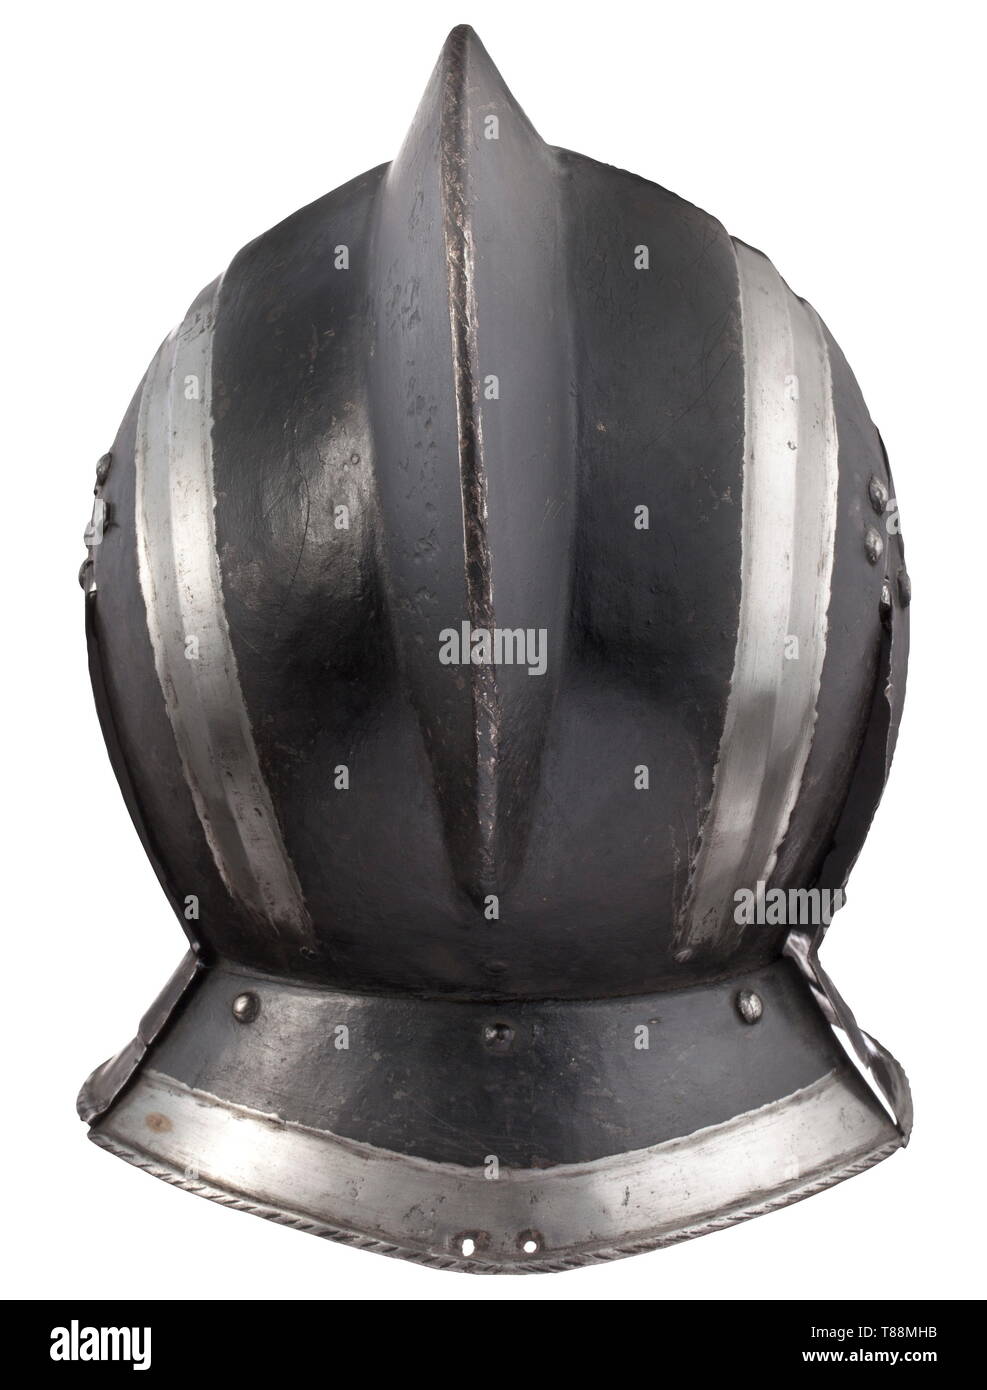 A Nuremberg burgonet from a black-and-white munition armour circa 1580 - 1600. With one-piece skull rising to an incised roped comb, embossed with a pair of wide shallow angular flutes over each side, drawn-out to a short up-turned peak, struck with Nuremberg mark, fitted with neck-guard of one lame, a pair of hinged cheek-pieces, recessed borders, and turned roped edges. Height 27.8 cm. Weight 1450 g. historic, historical, weapons, arms, weapon, arm, baronial, military, militaria, rapier, rapiers, sword, swords, melee weapon, melee weapons, thru, Additional-Rights-Clearance-Info-Not-Available Stock Photo